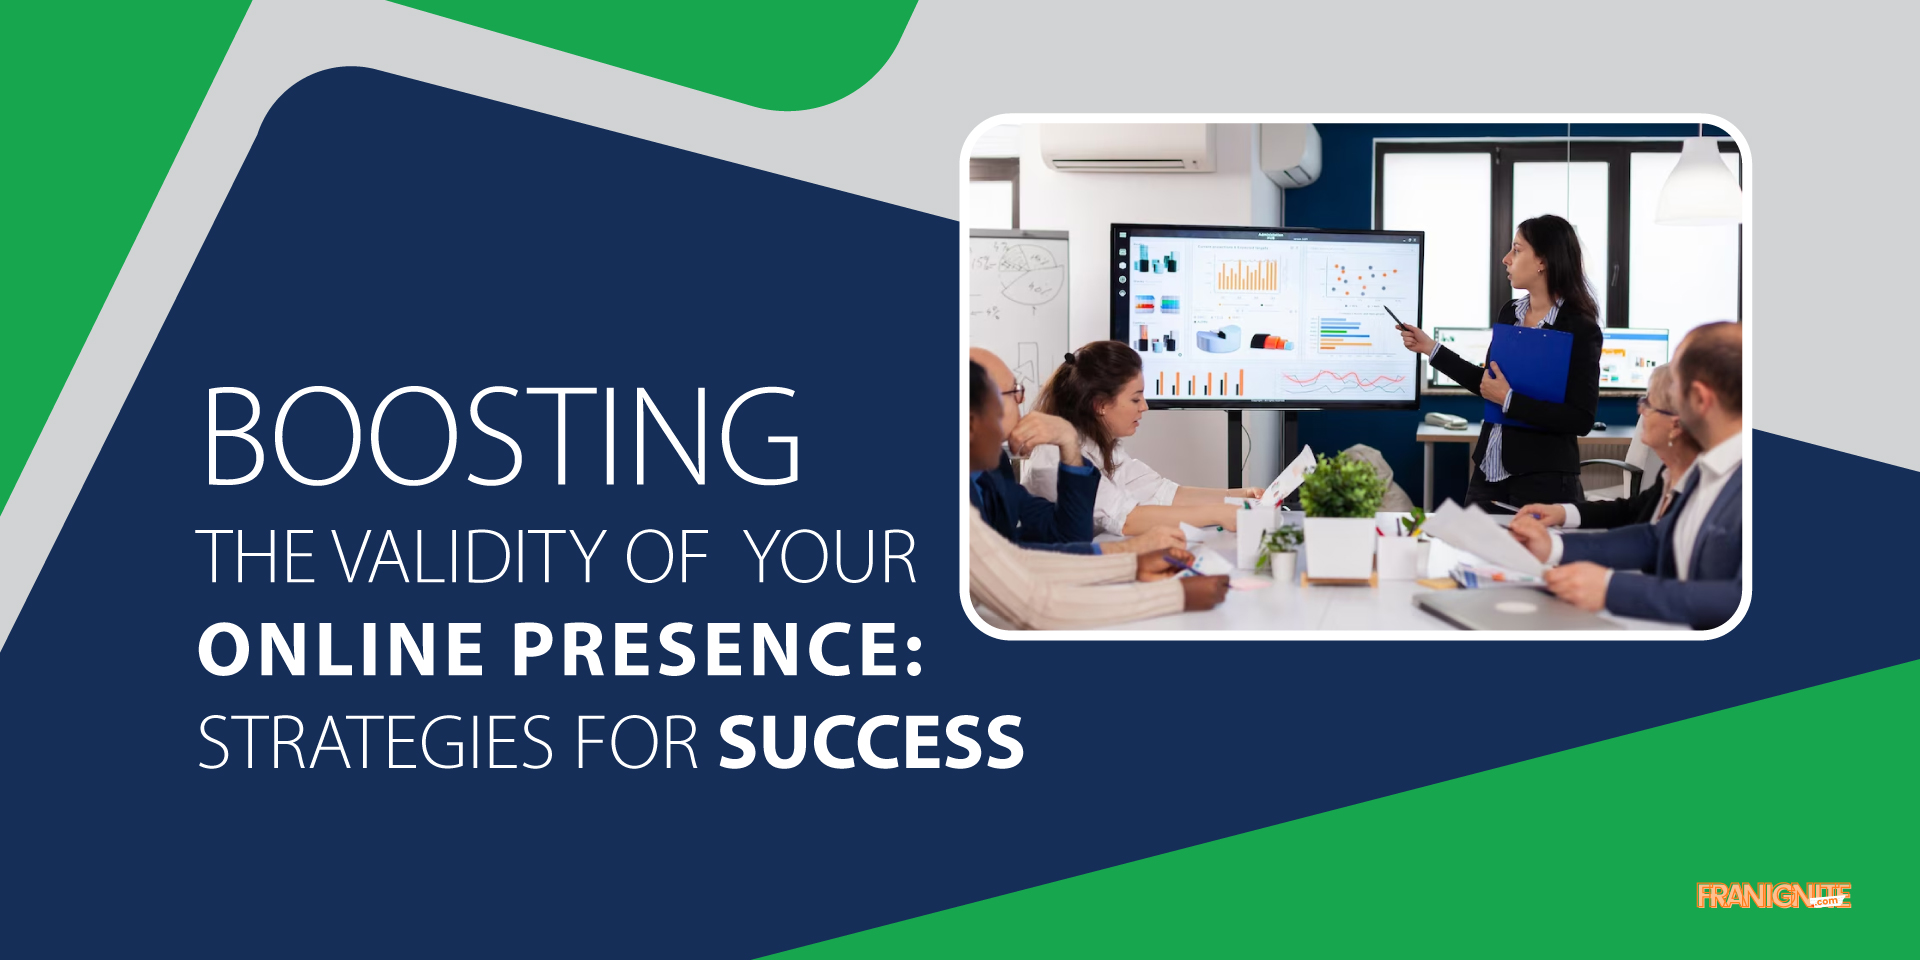 Boosting the Validity of Your Online Presence: Strategies for Success